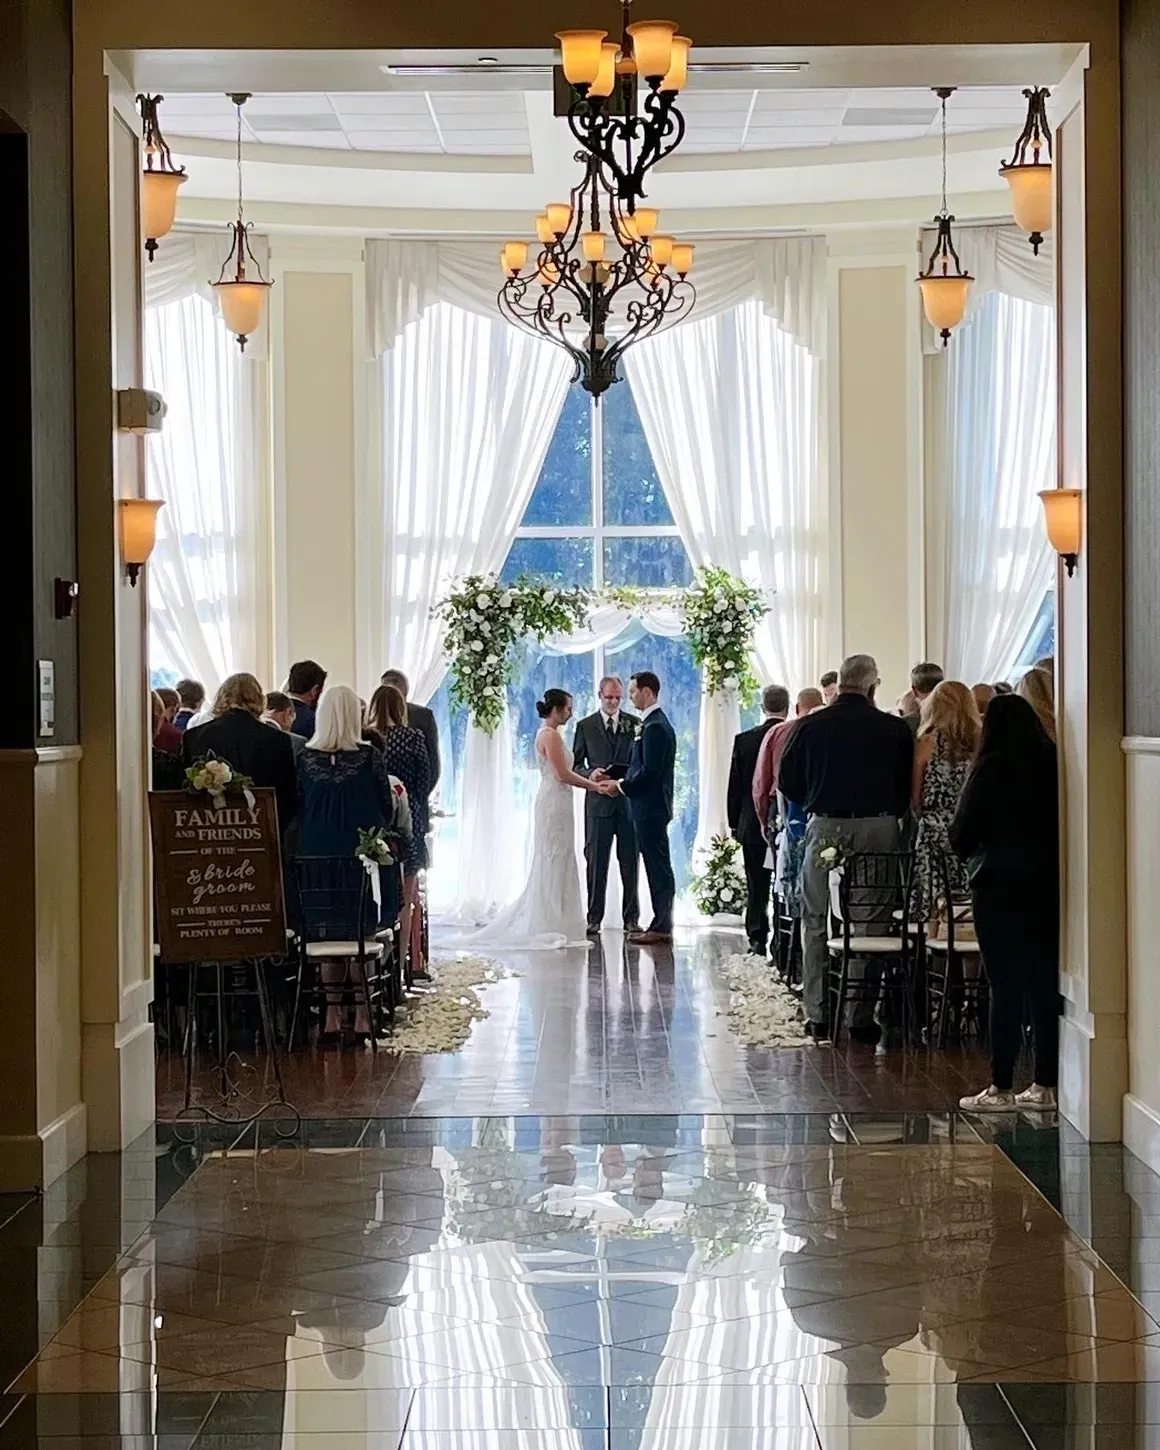 A wedding ceremony in the hall of a hotel.